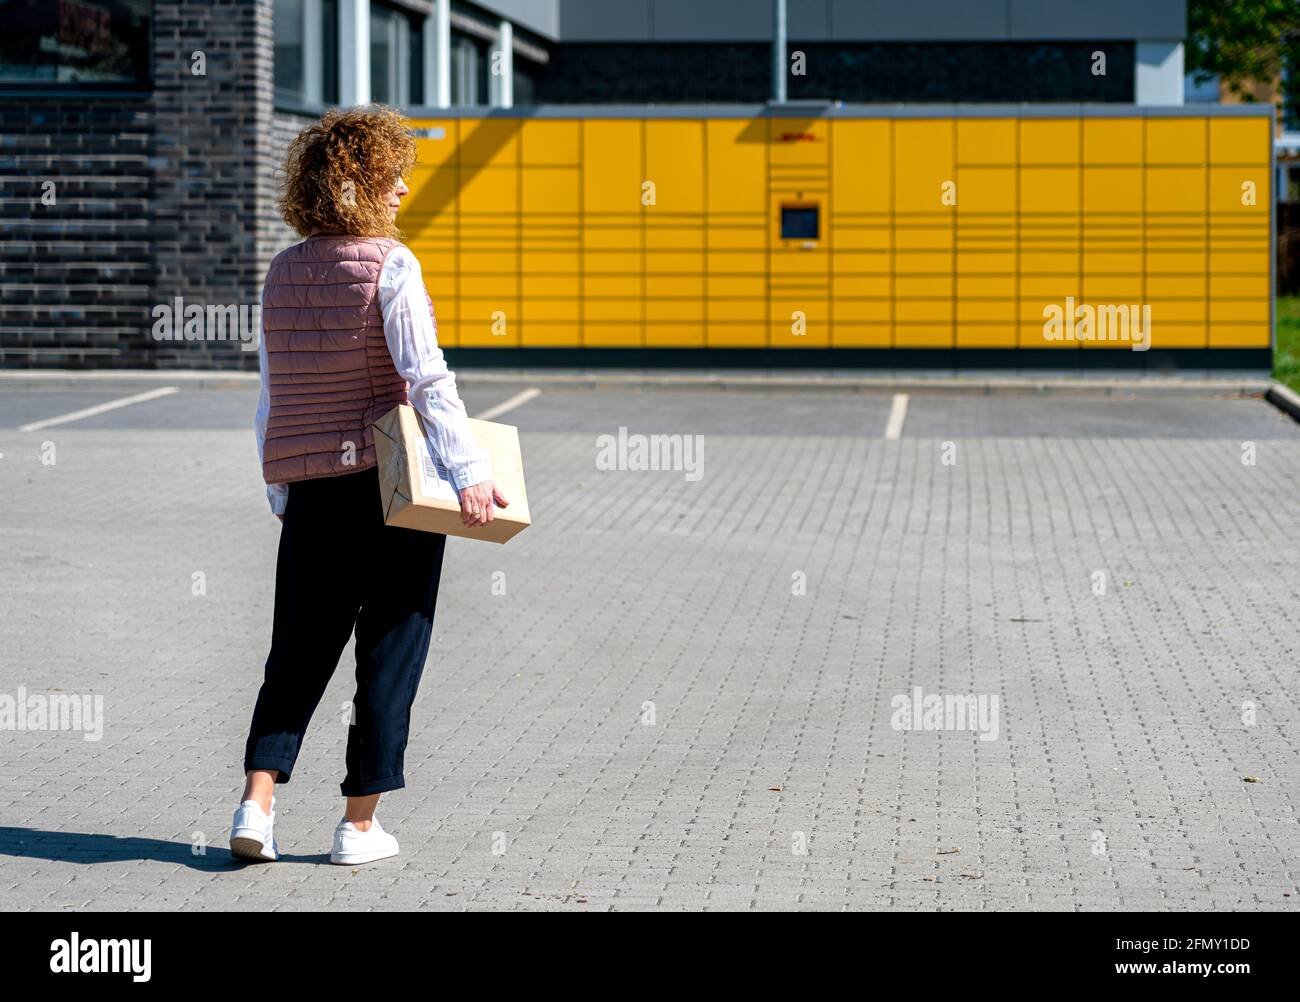 Packstation Of DHL Stock Photo